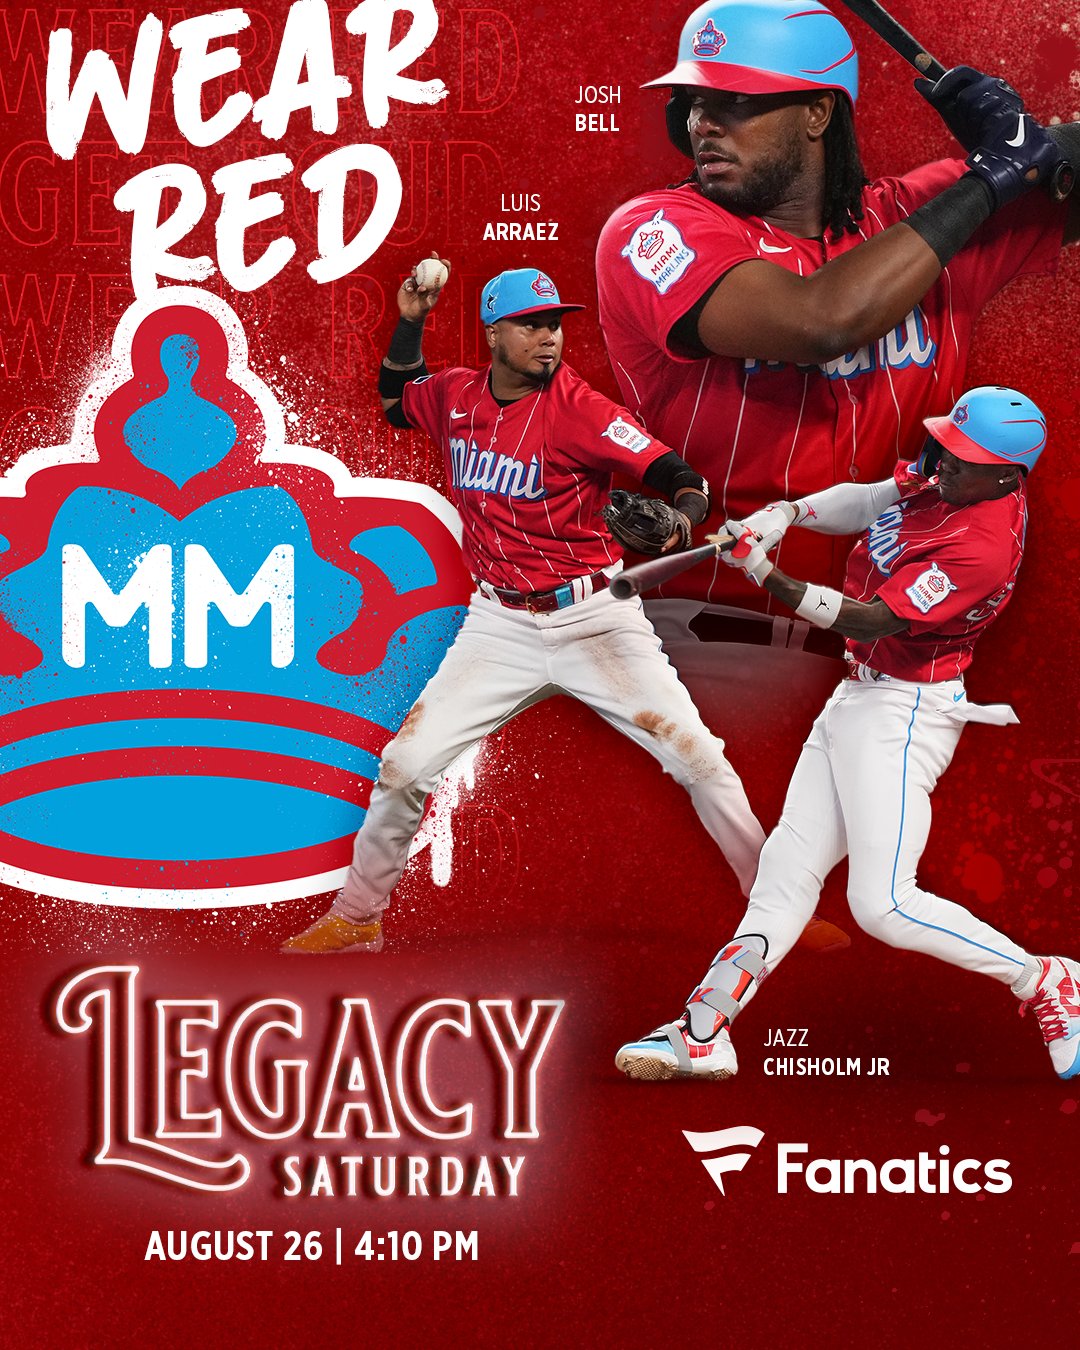 Miami Marlins on X: On Saturday's we strut red. 𝘑𝘰𝘪𝘯 𝘶𝘴